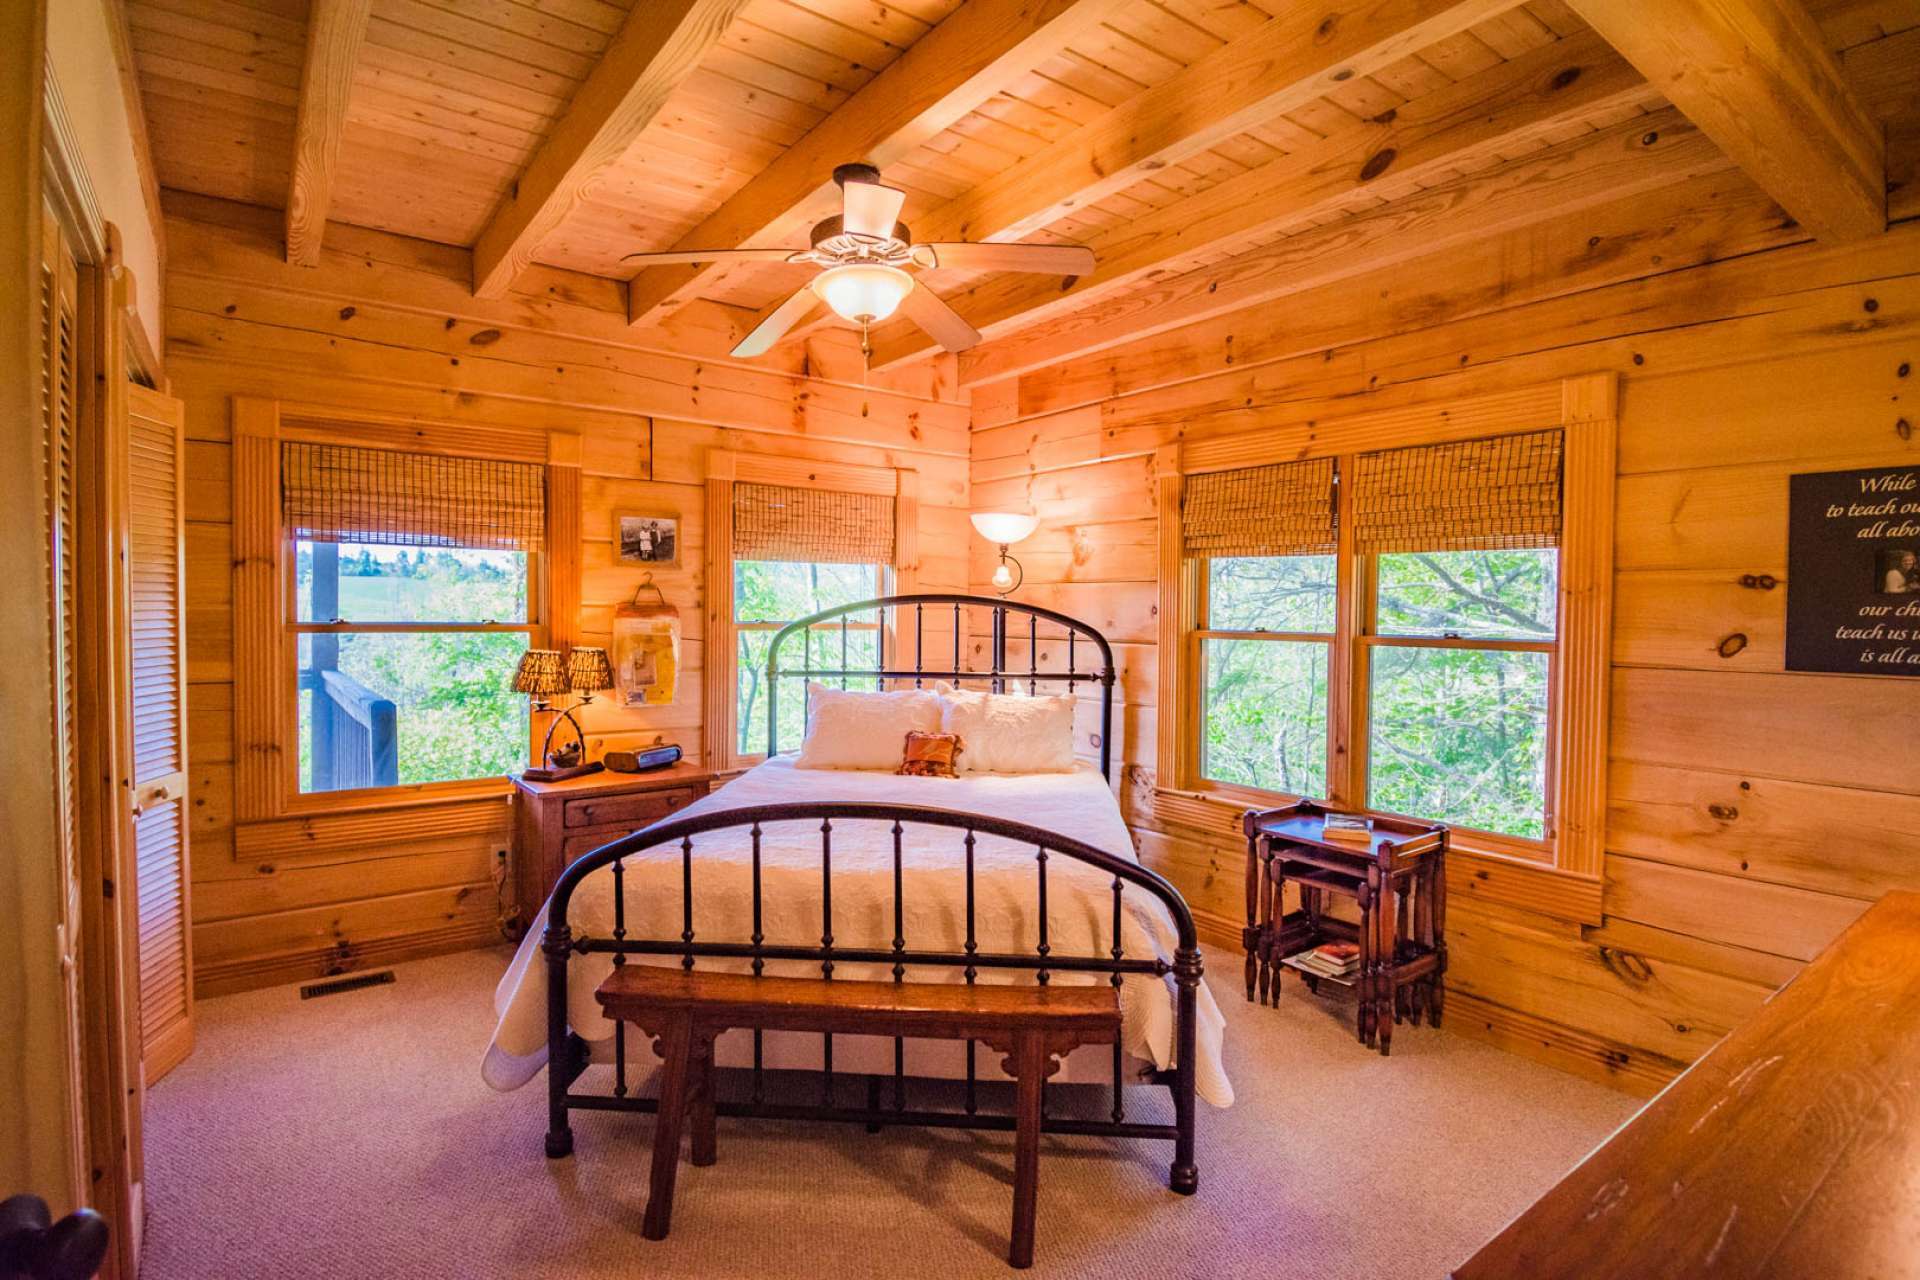 The main level master suite features lots of windows, exposed beams, comfortable carpeted floor, and a private bath.